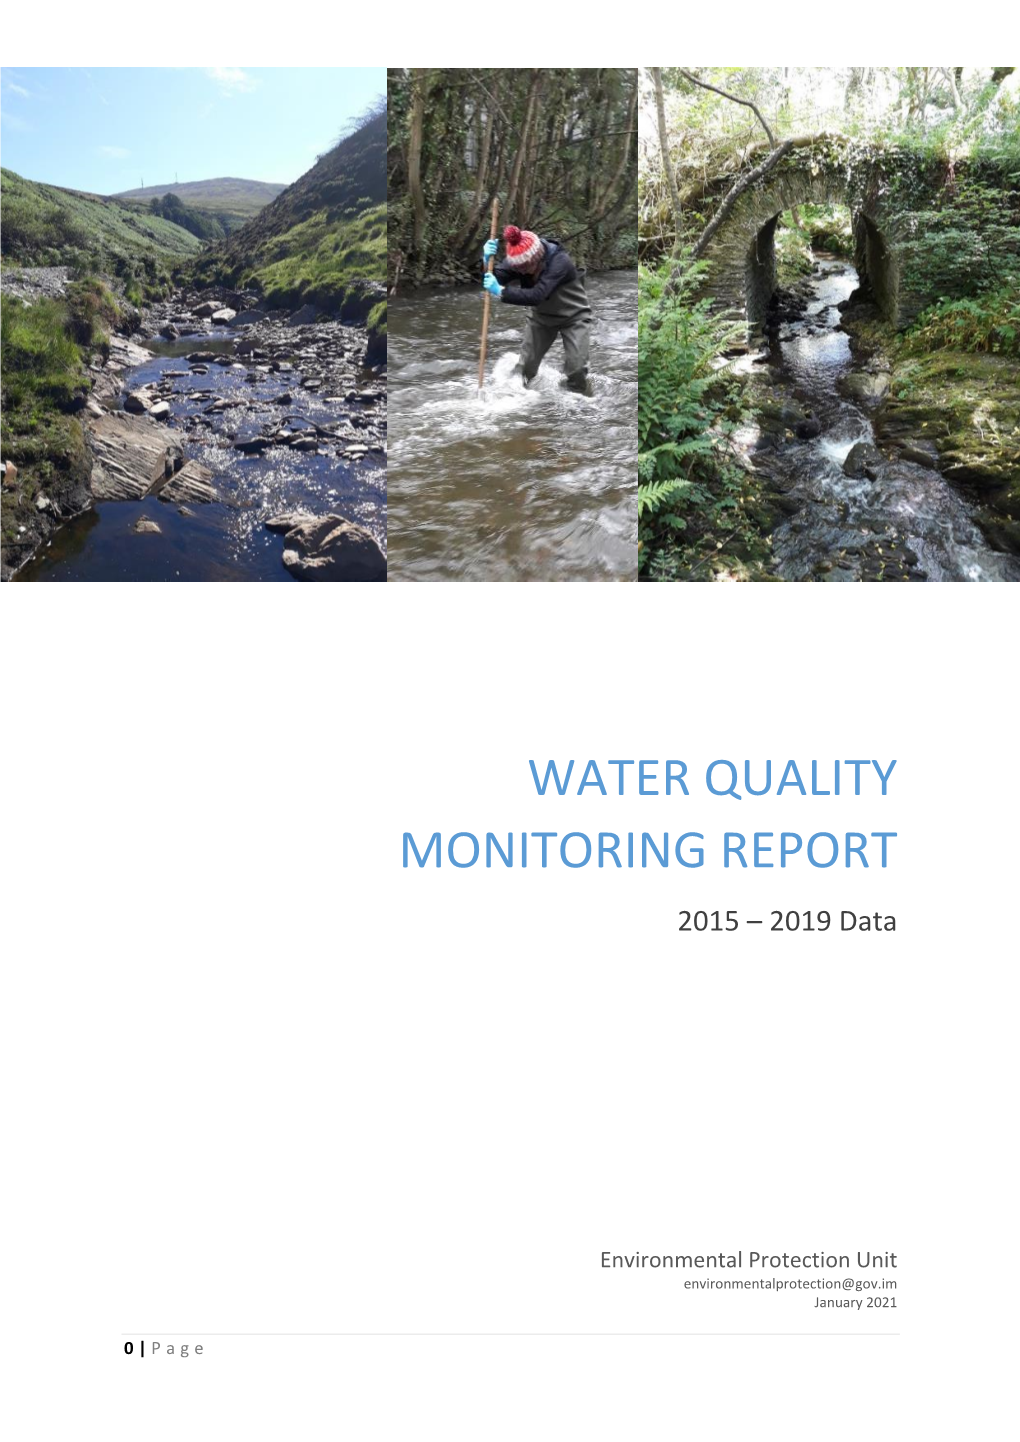 WATER QUALITY MONITORING REPORT 2015 – 2019 Data